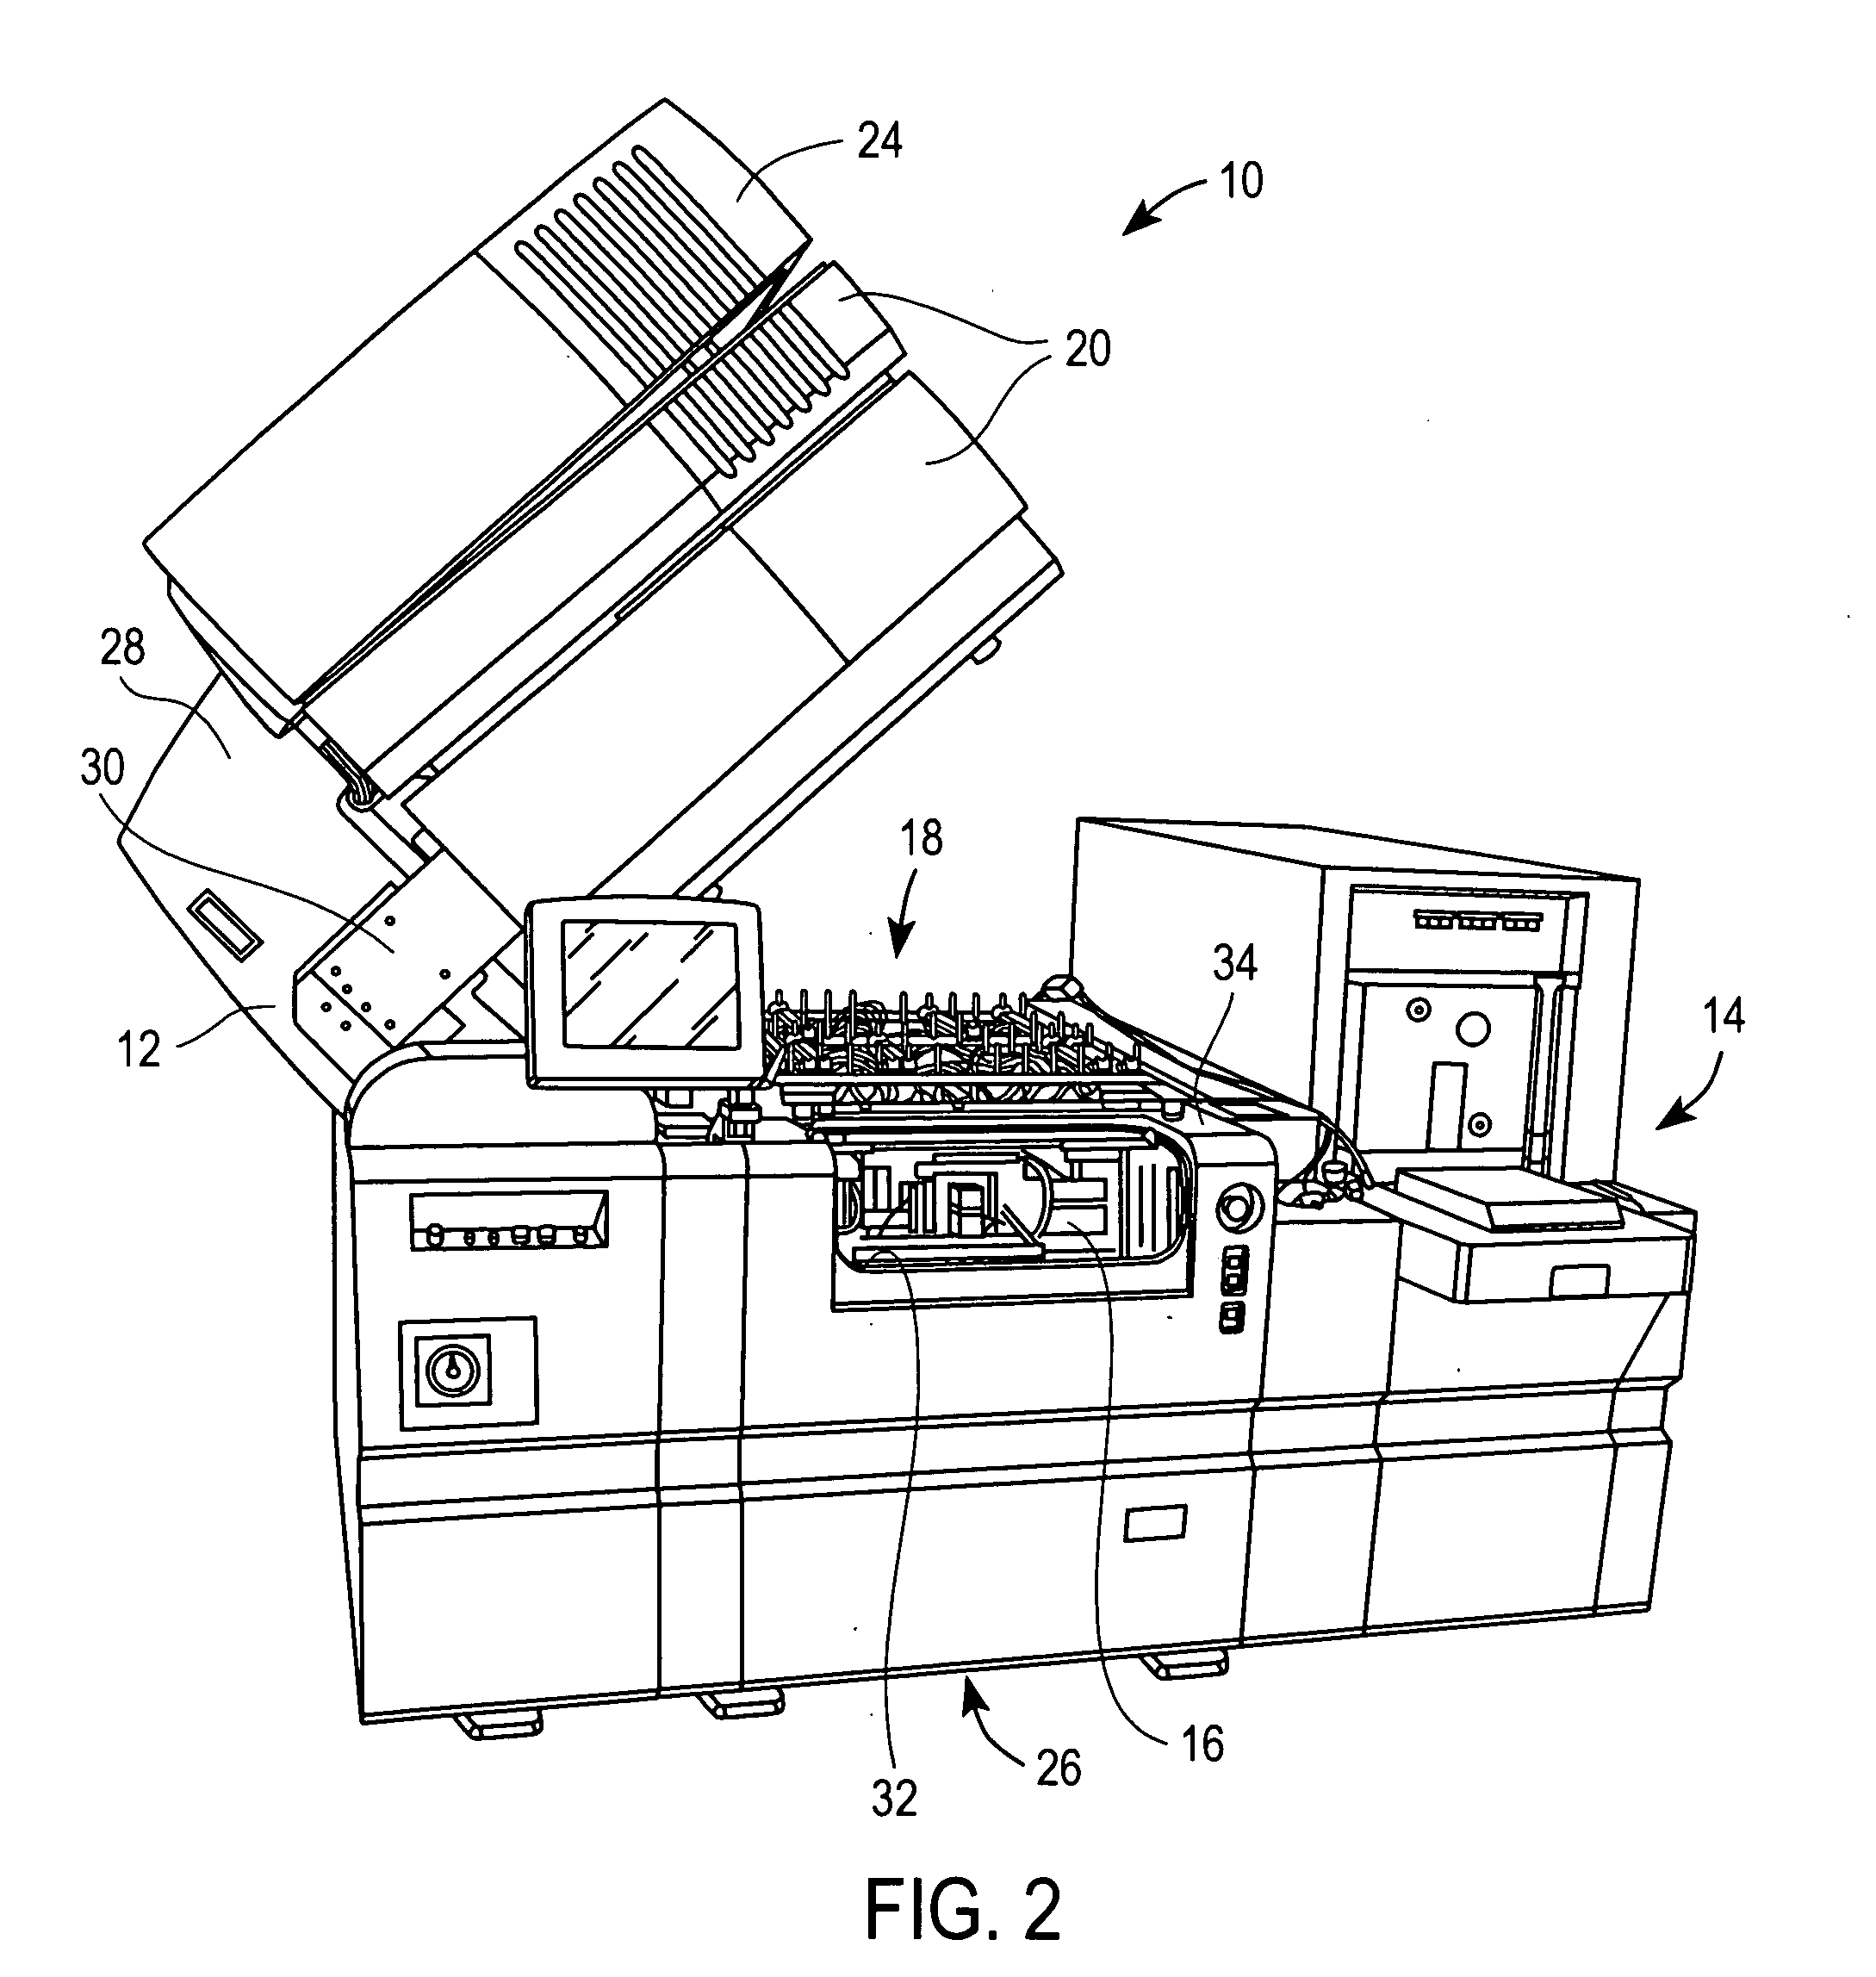 Apparatus for testing electronic devices